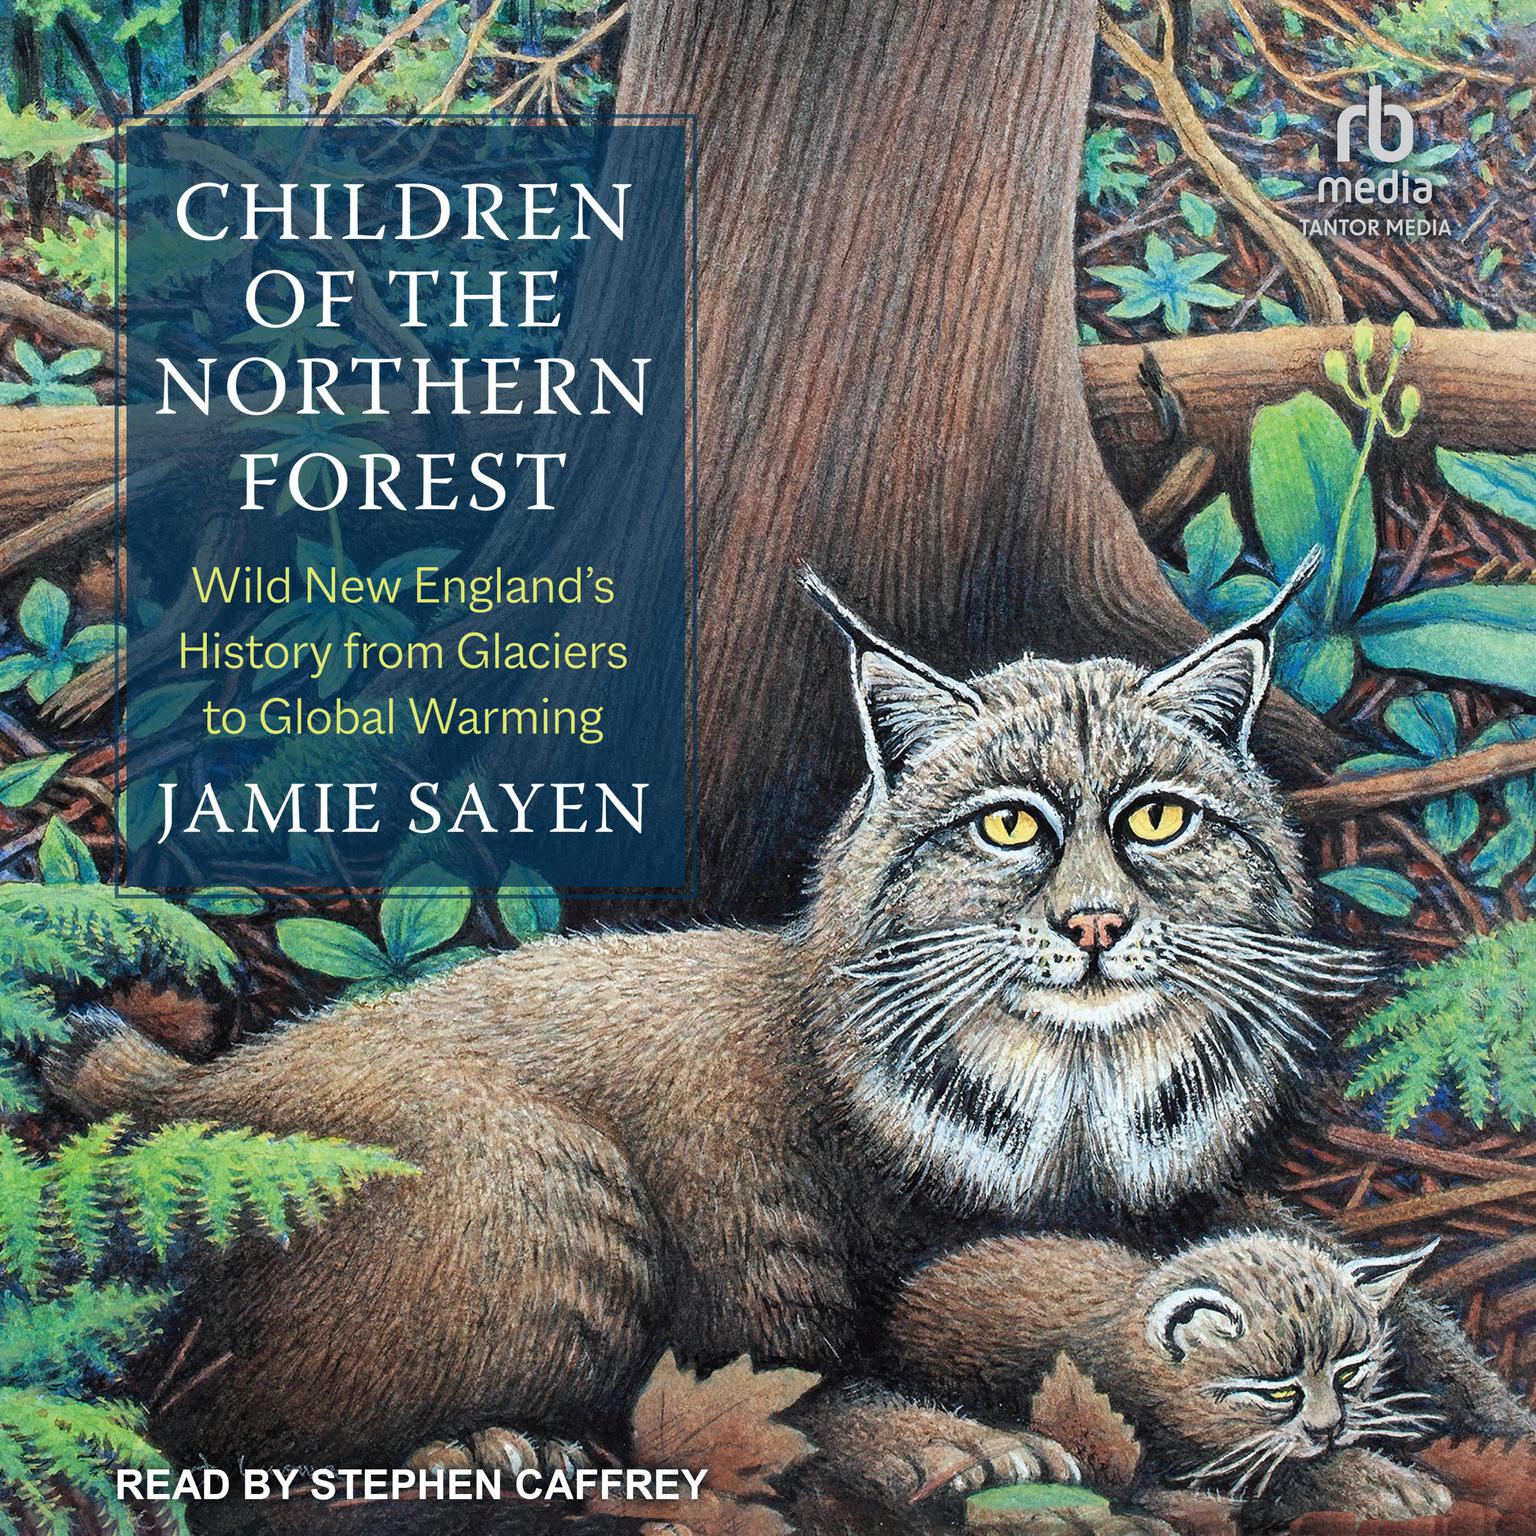 Children of the Northern Forest: Wild New Englands History from Glaciers to Global Warming Audiobook, by Jamie Sayen